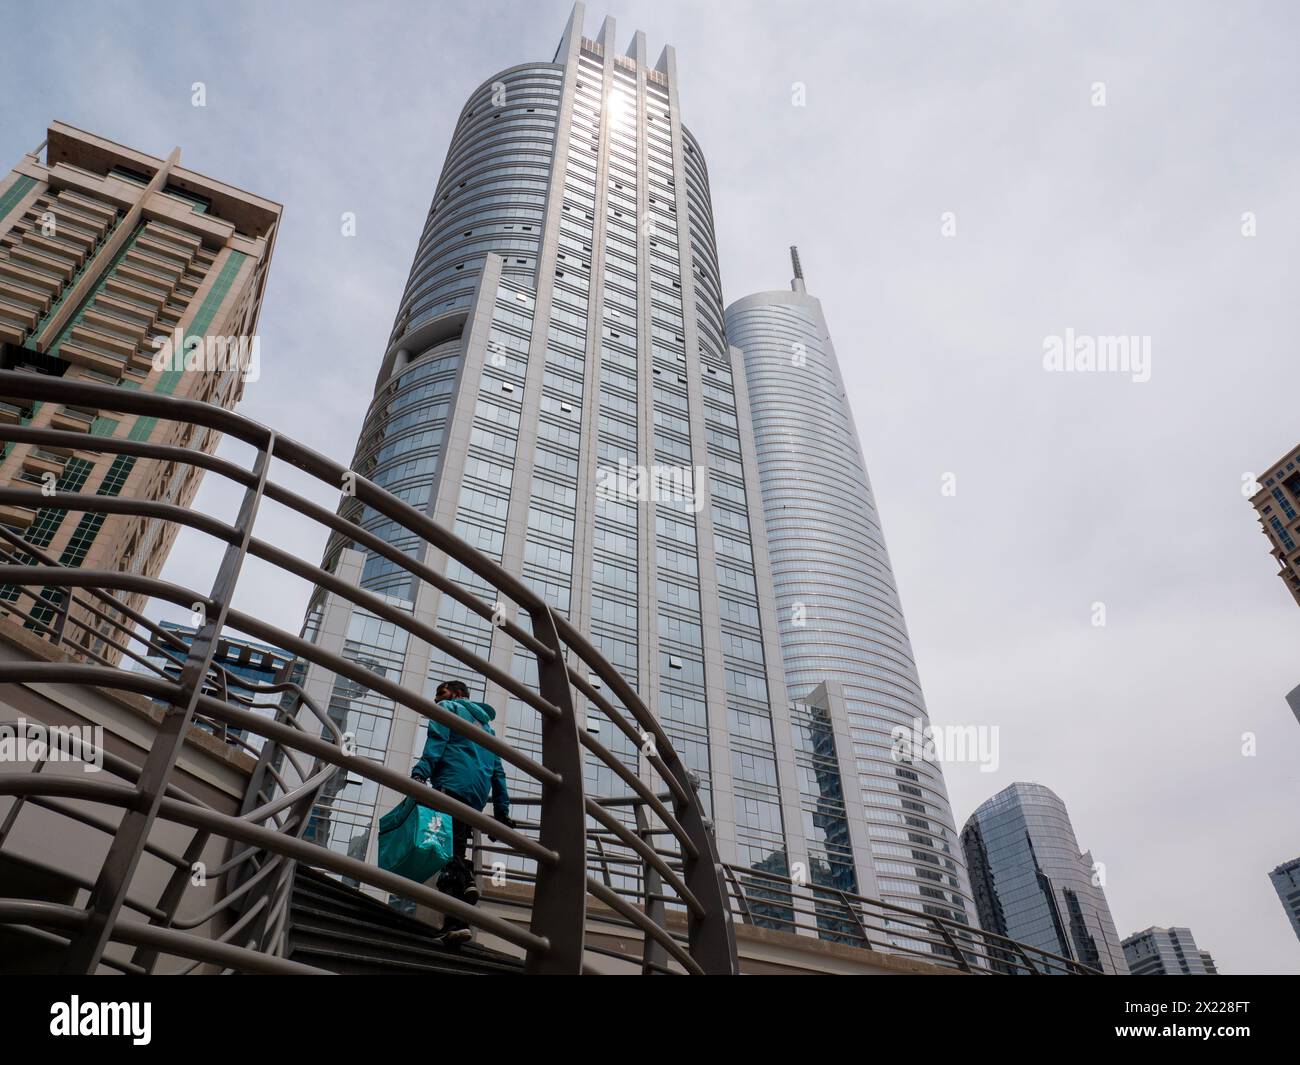 Deliveroo  delivery worker walking up stairs at JLT Jumeirah Lake Towers, Dubai, United Arab Emirates Stock Photo